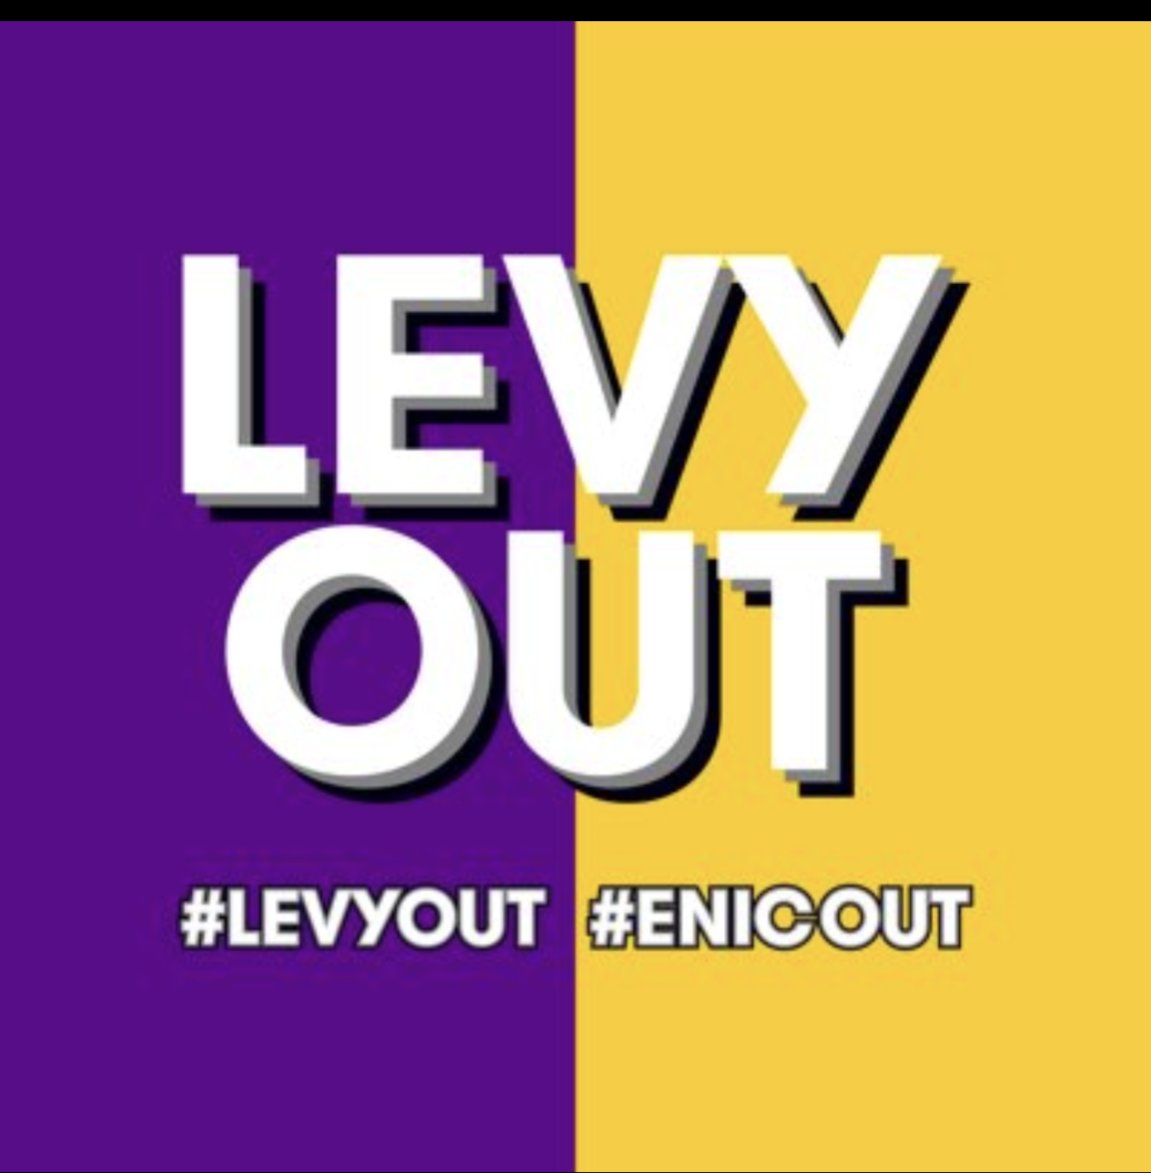 No longer ST holders.
No longer members.
App uninstalled.
Just waiting to be able to withdraw our £360 from our accounts & that's us done 👍🏻
Always be Tottenham but these 2 Customer Reference Numbers will not spend another penny towards ENIC/Levy & Lewis.
#Levyout #ENICout